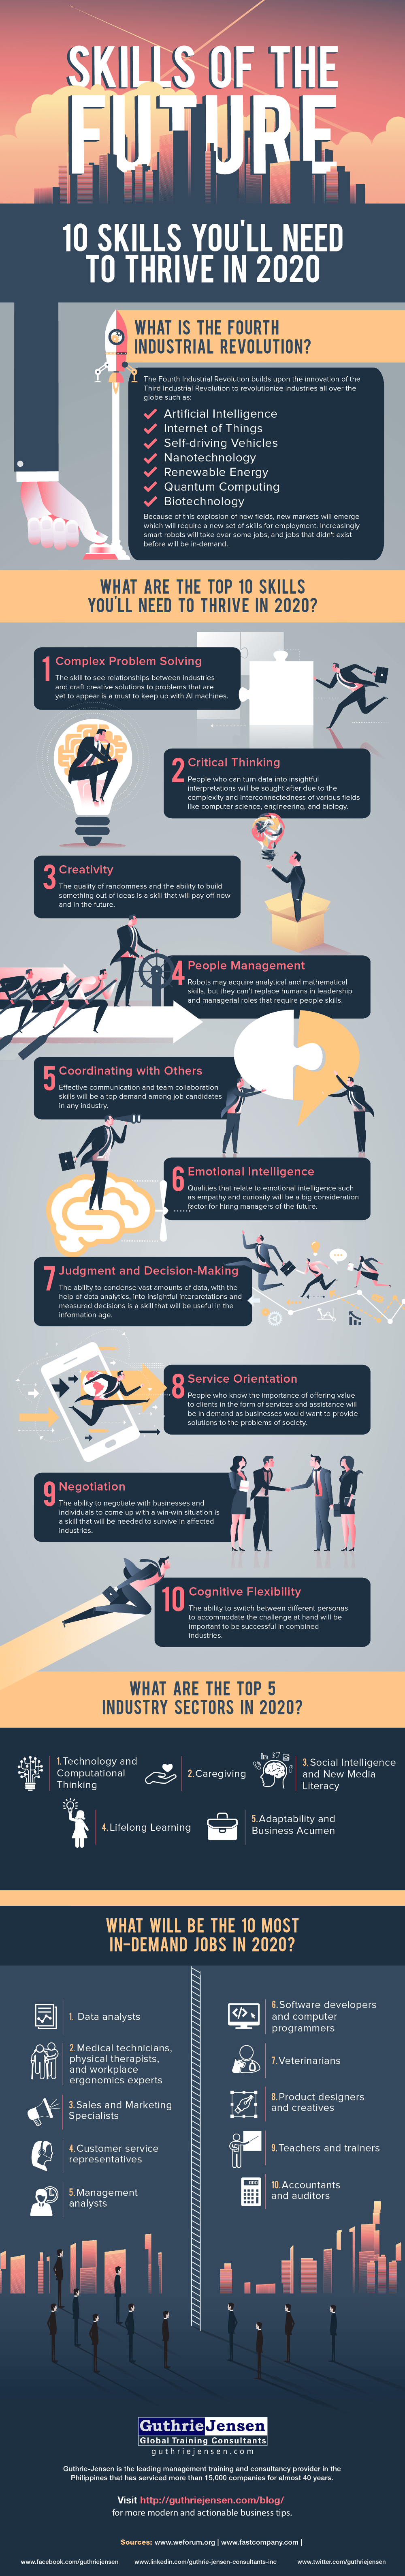 [Infographic] Skills of the Future: 10 Skills You’ll Need to Thrive in 2020 